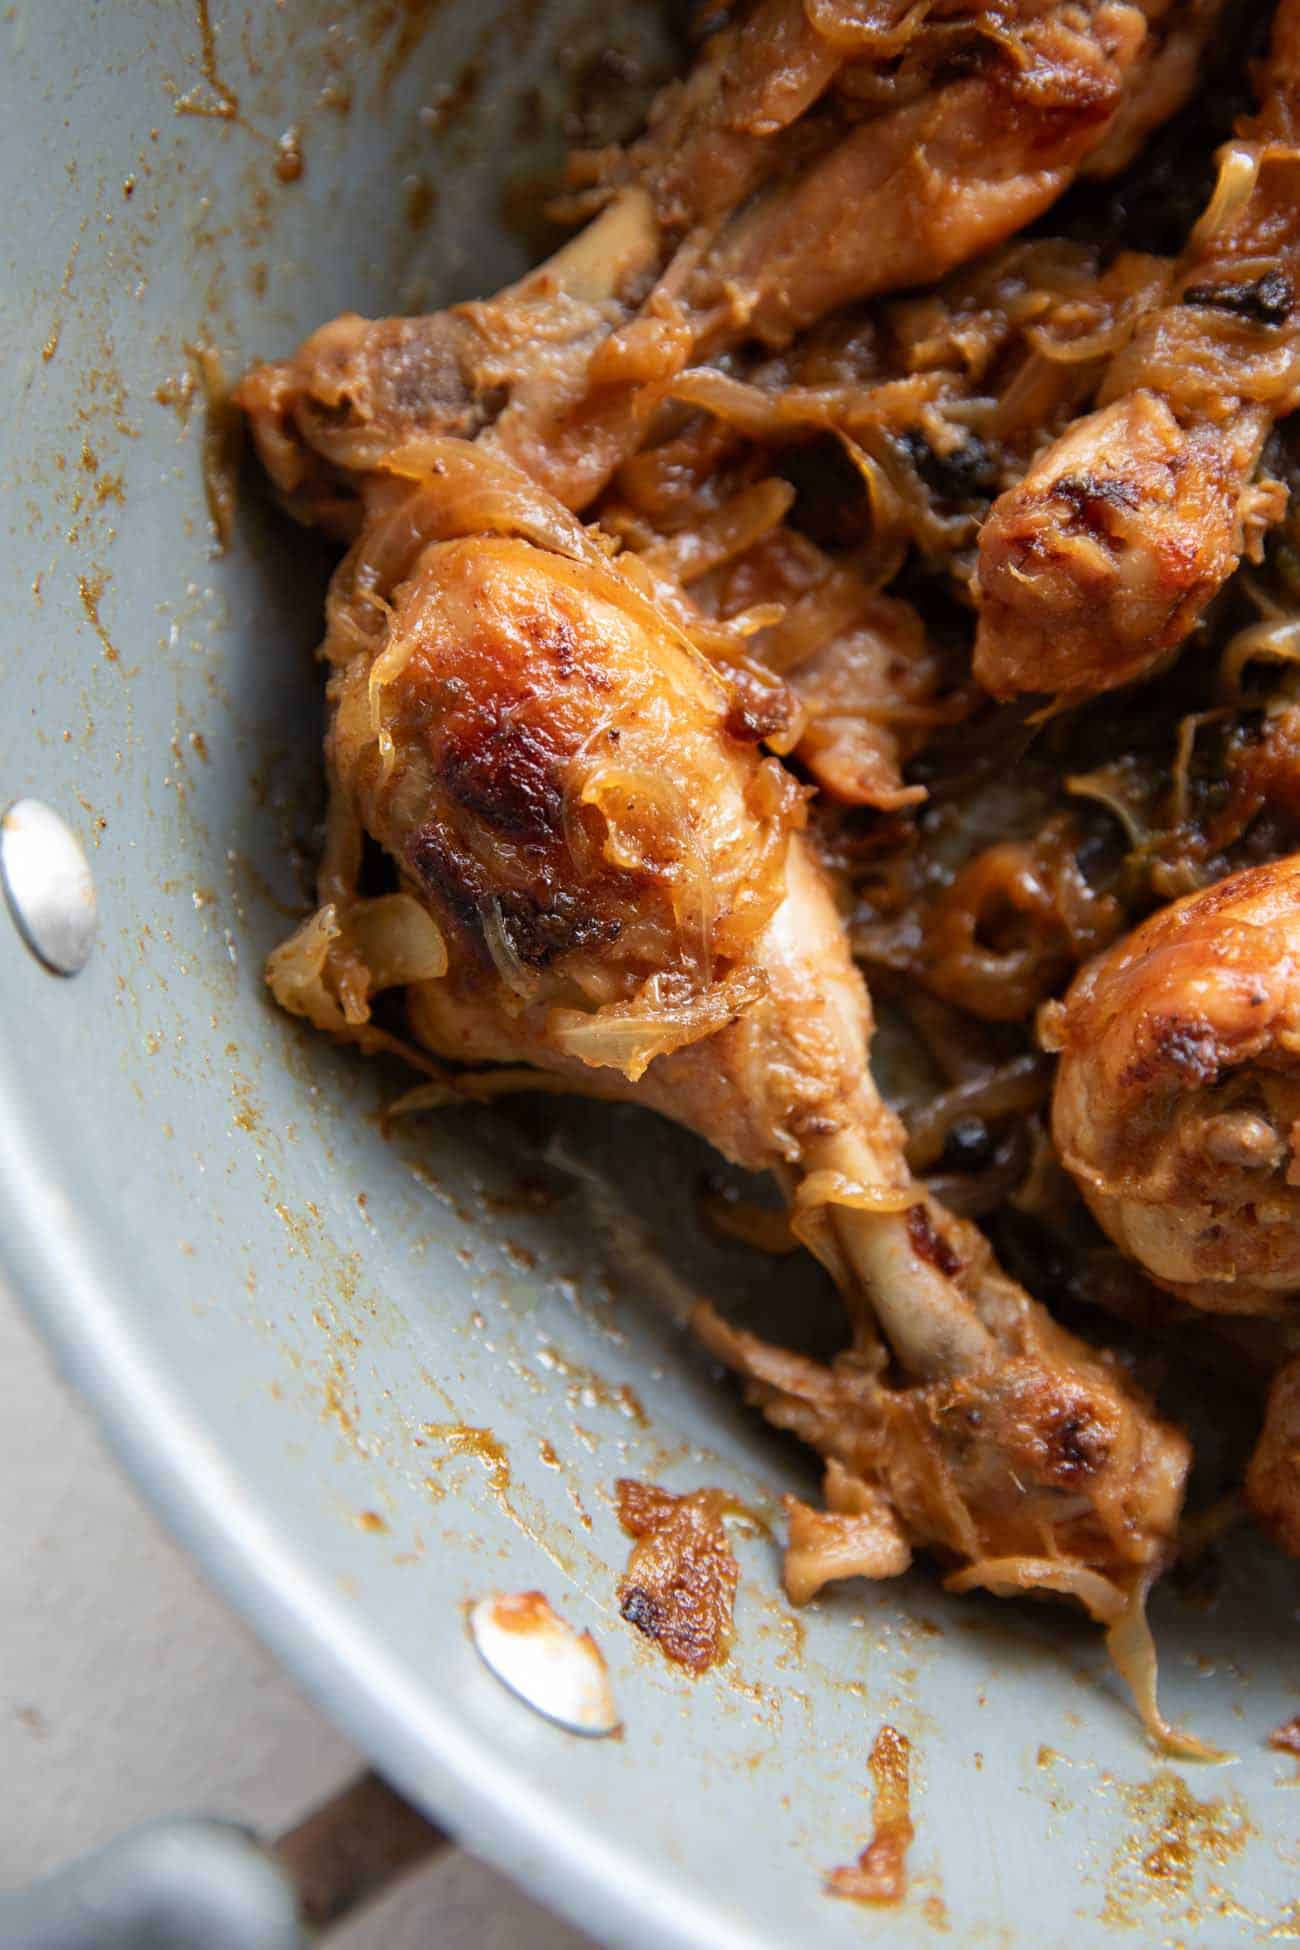 Chicken with caramelized onions in a pan